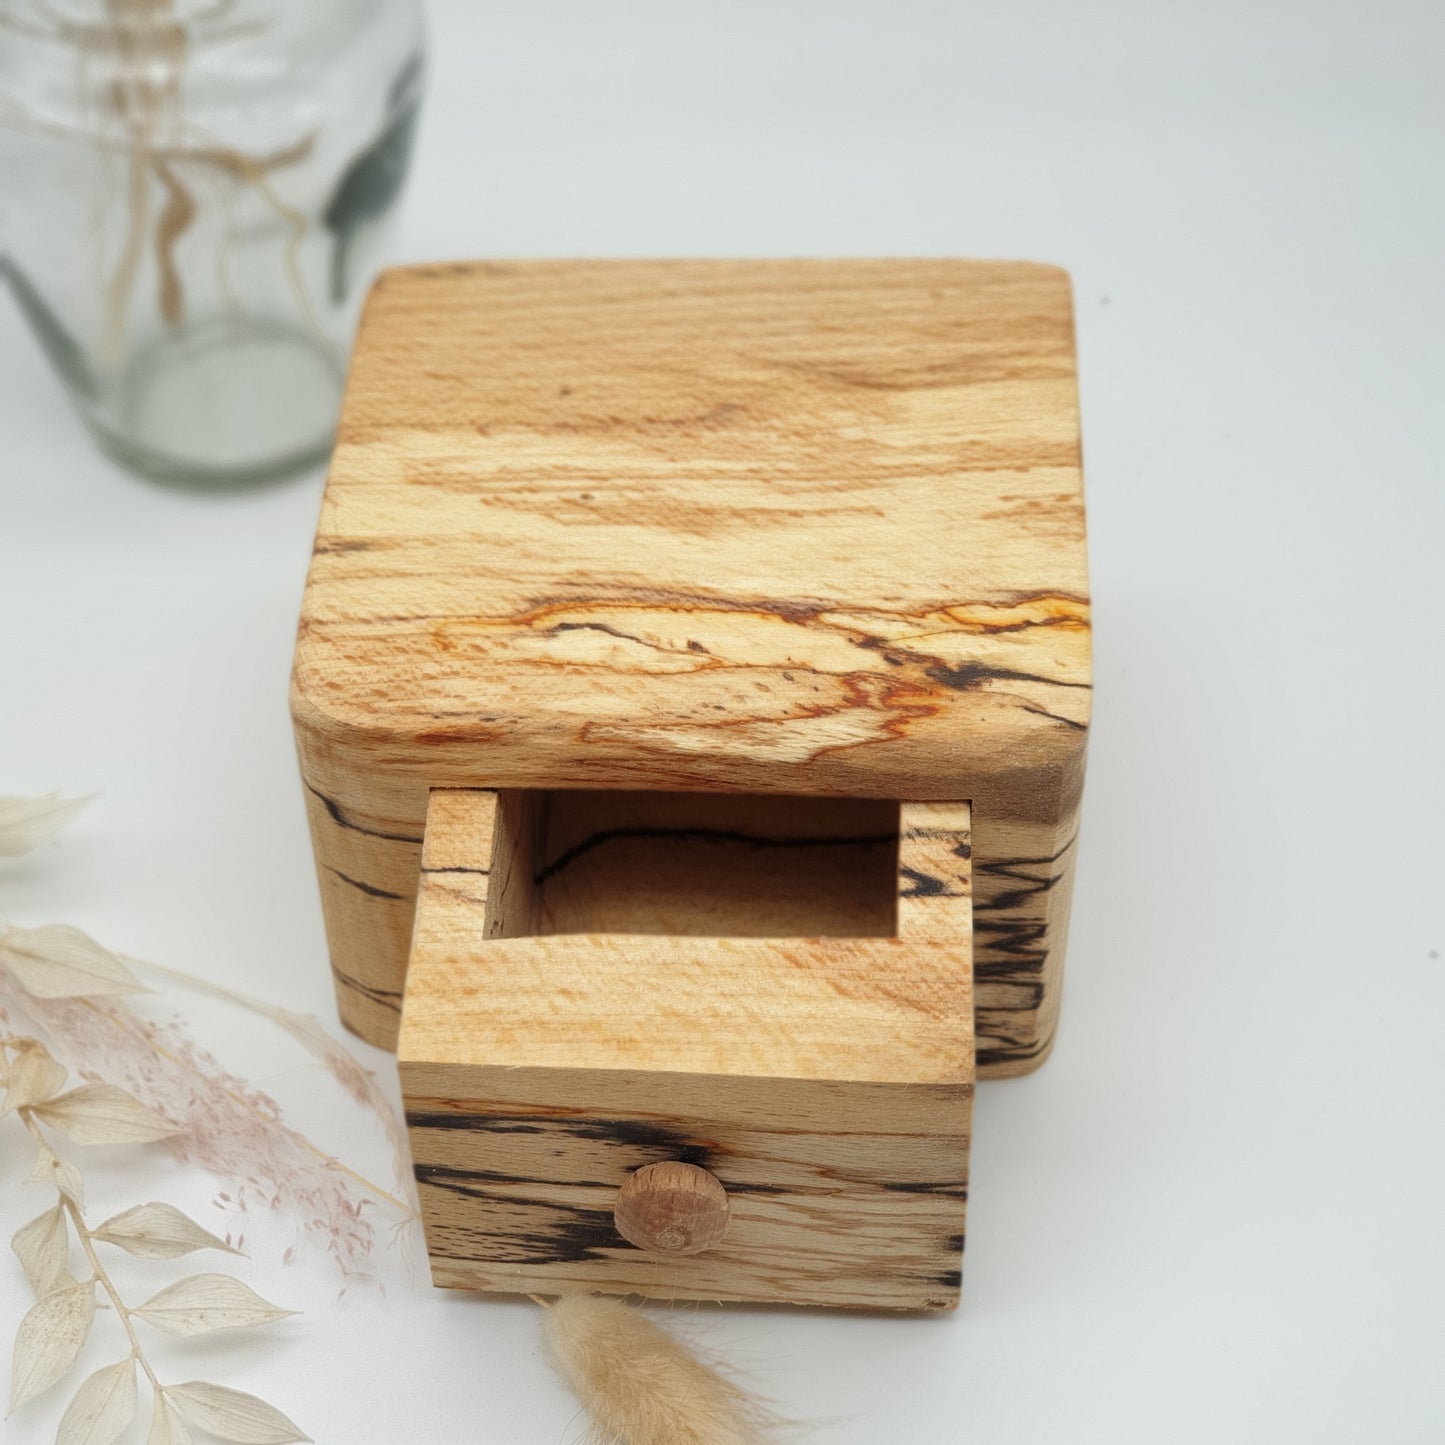 Natural edge wooden box - Spalted Beech